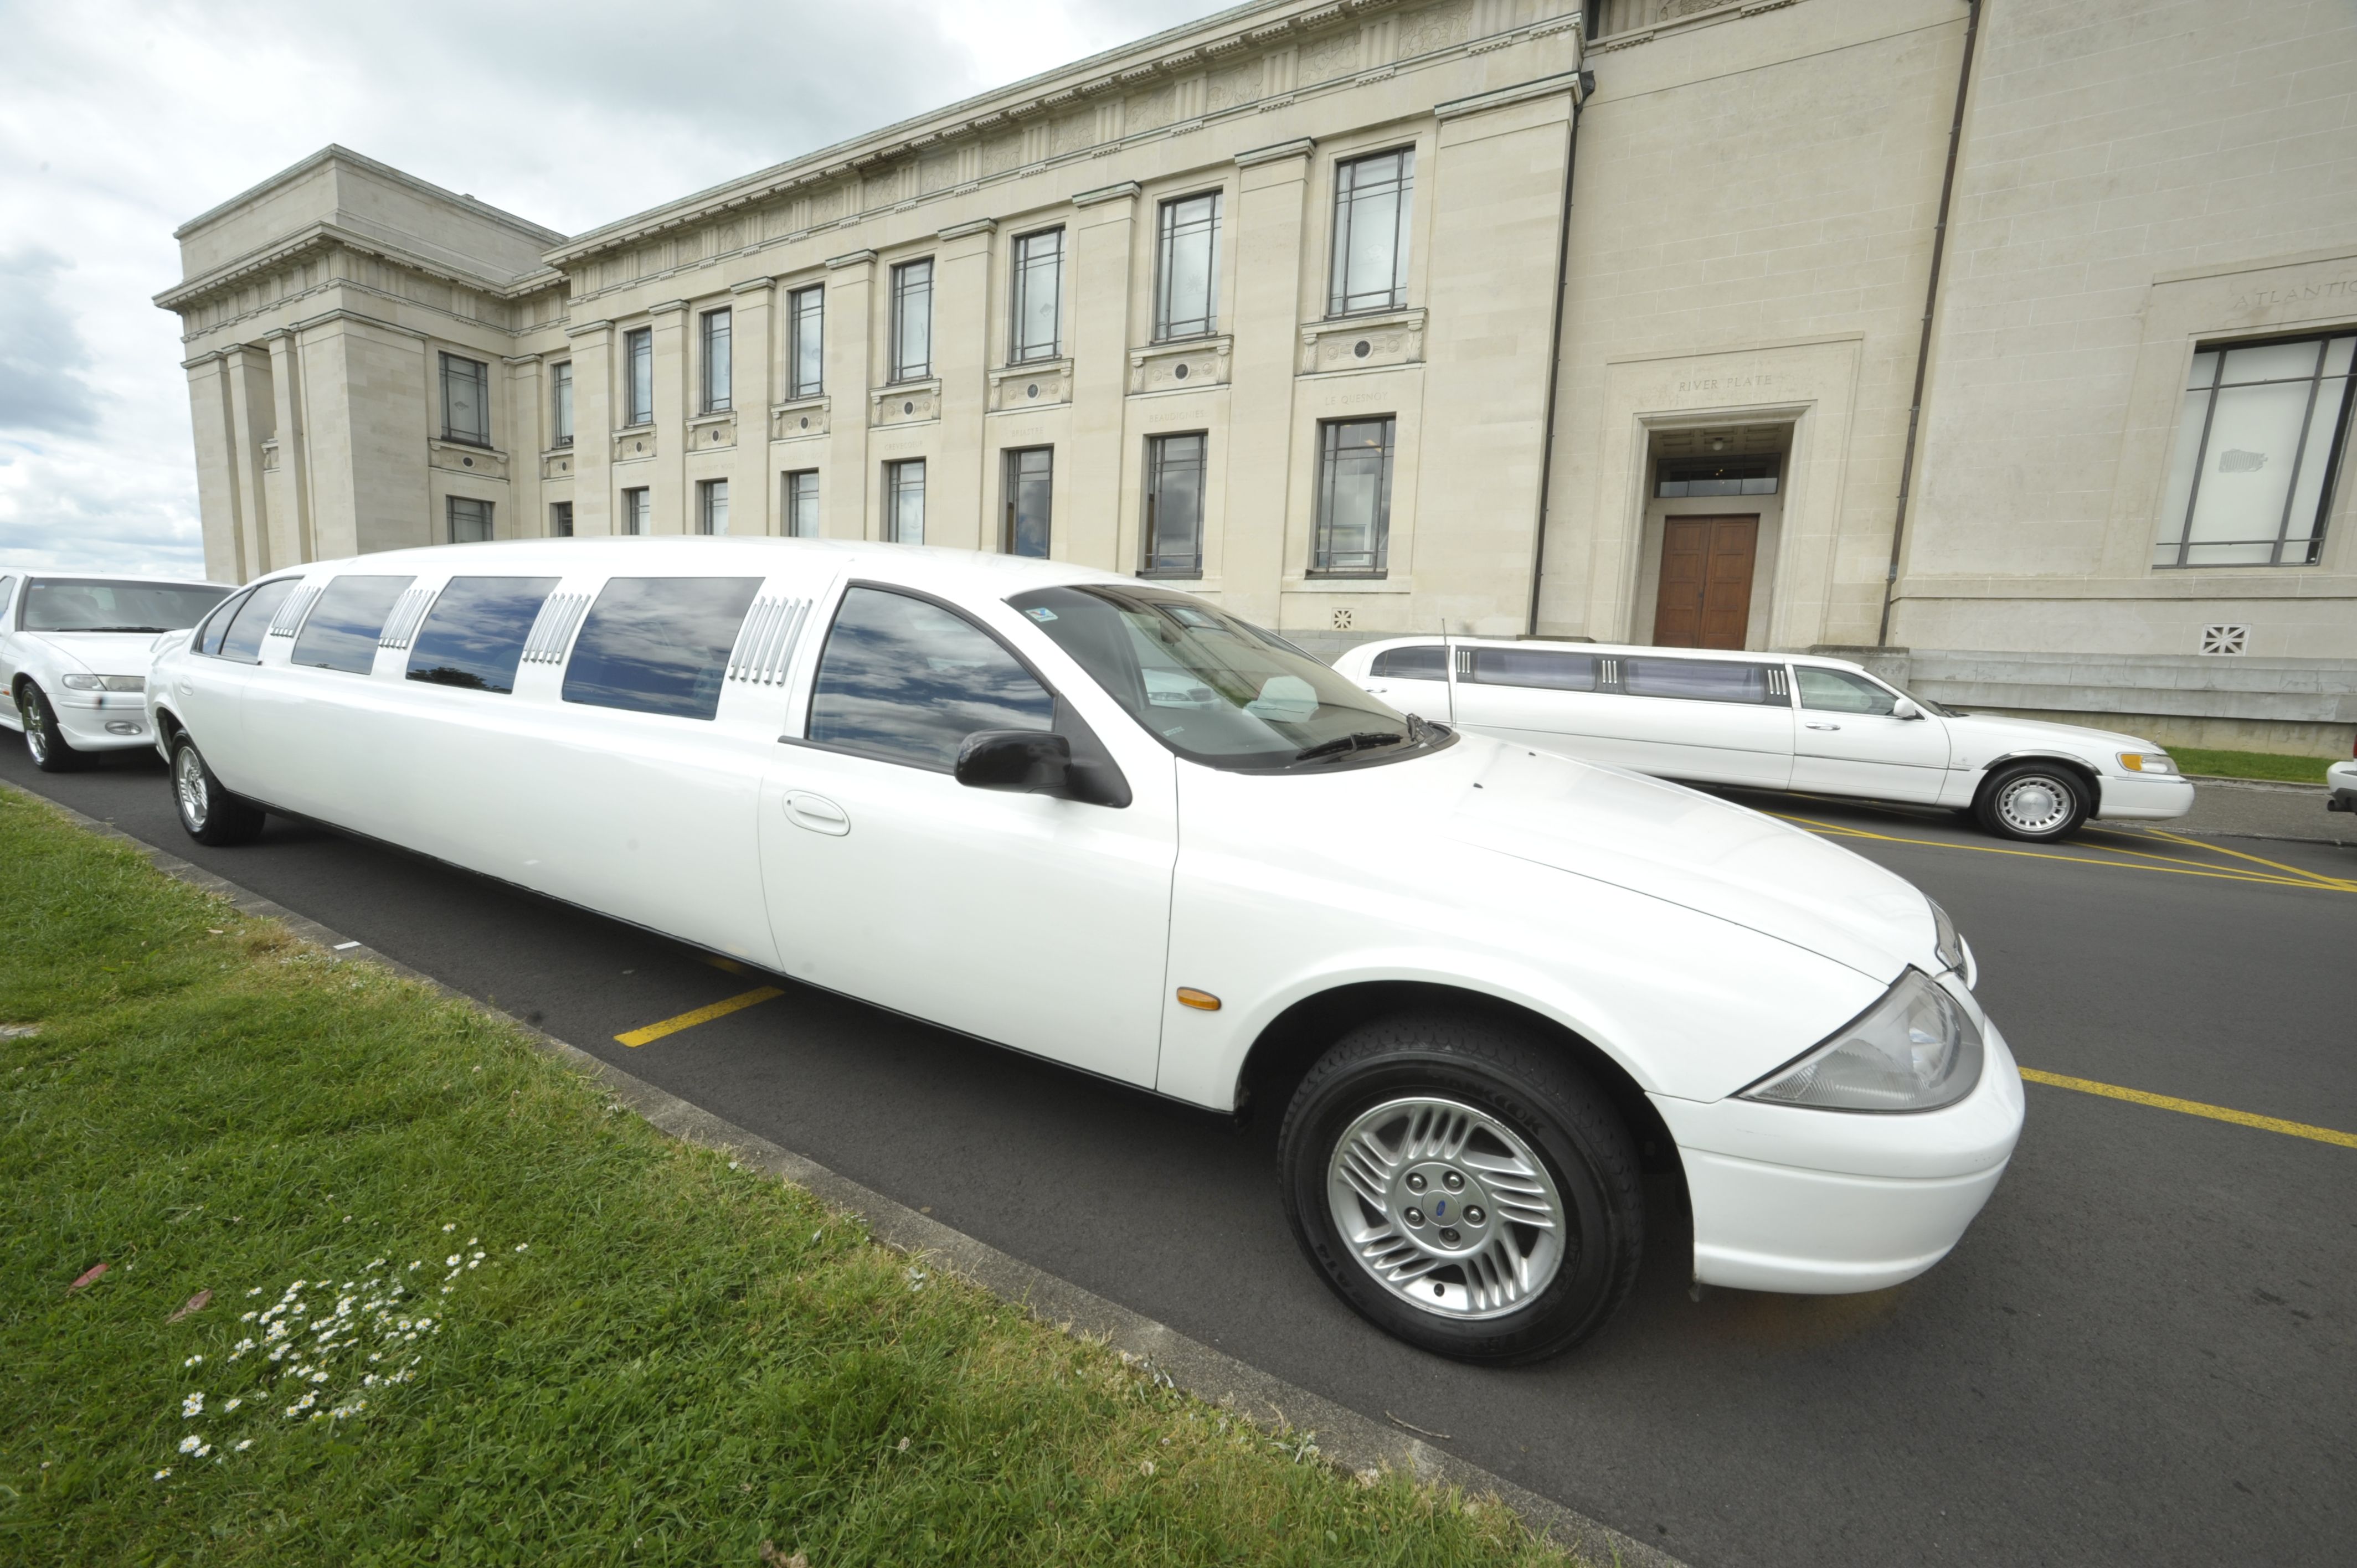 12 Seater Ford Limousine